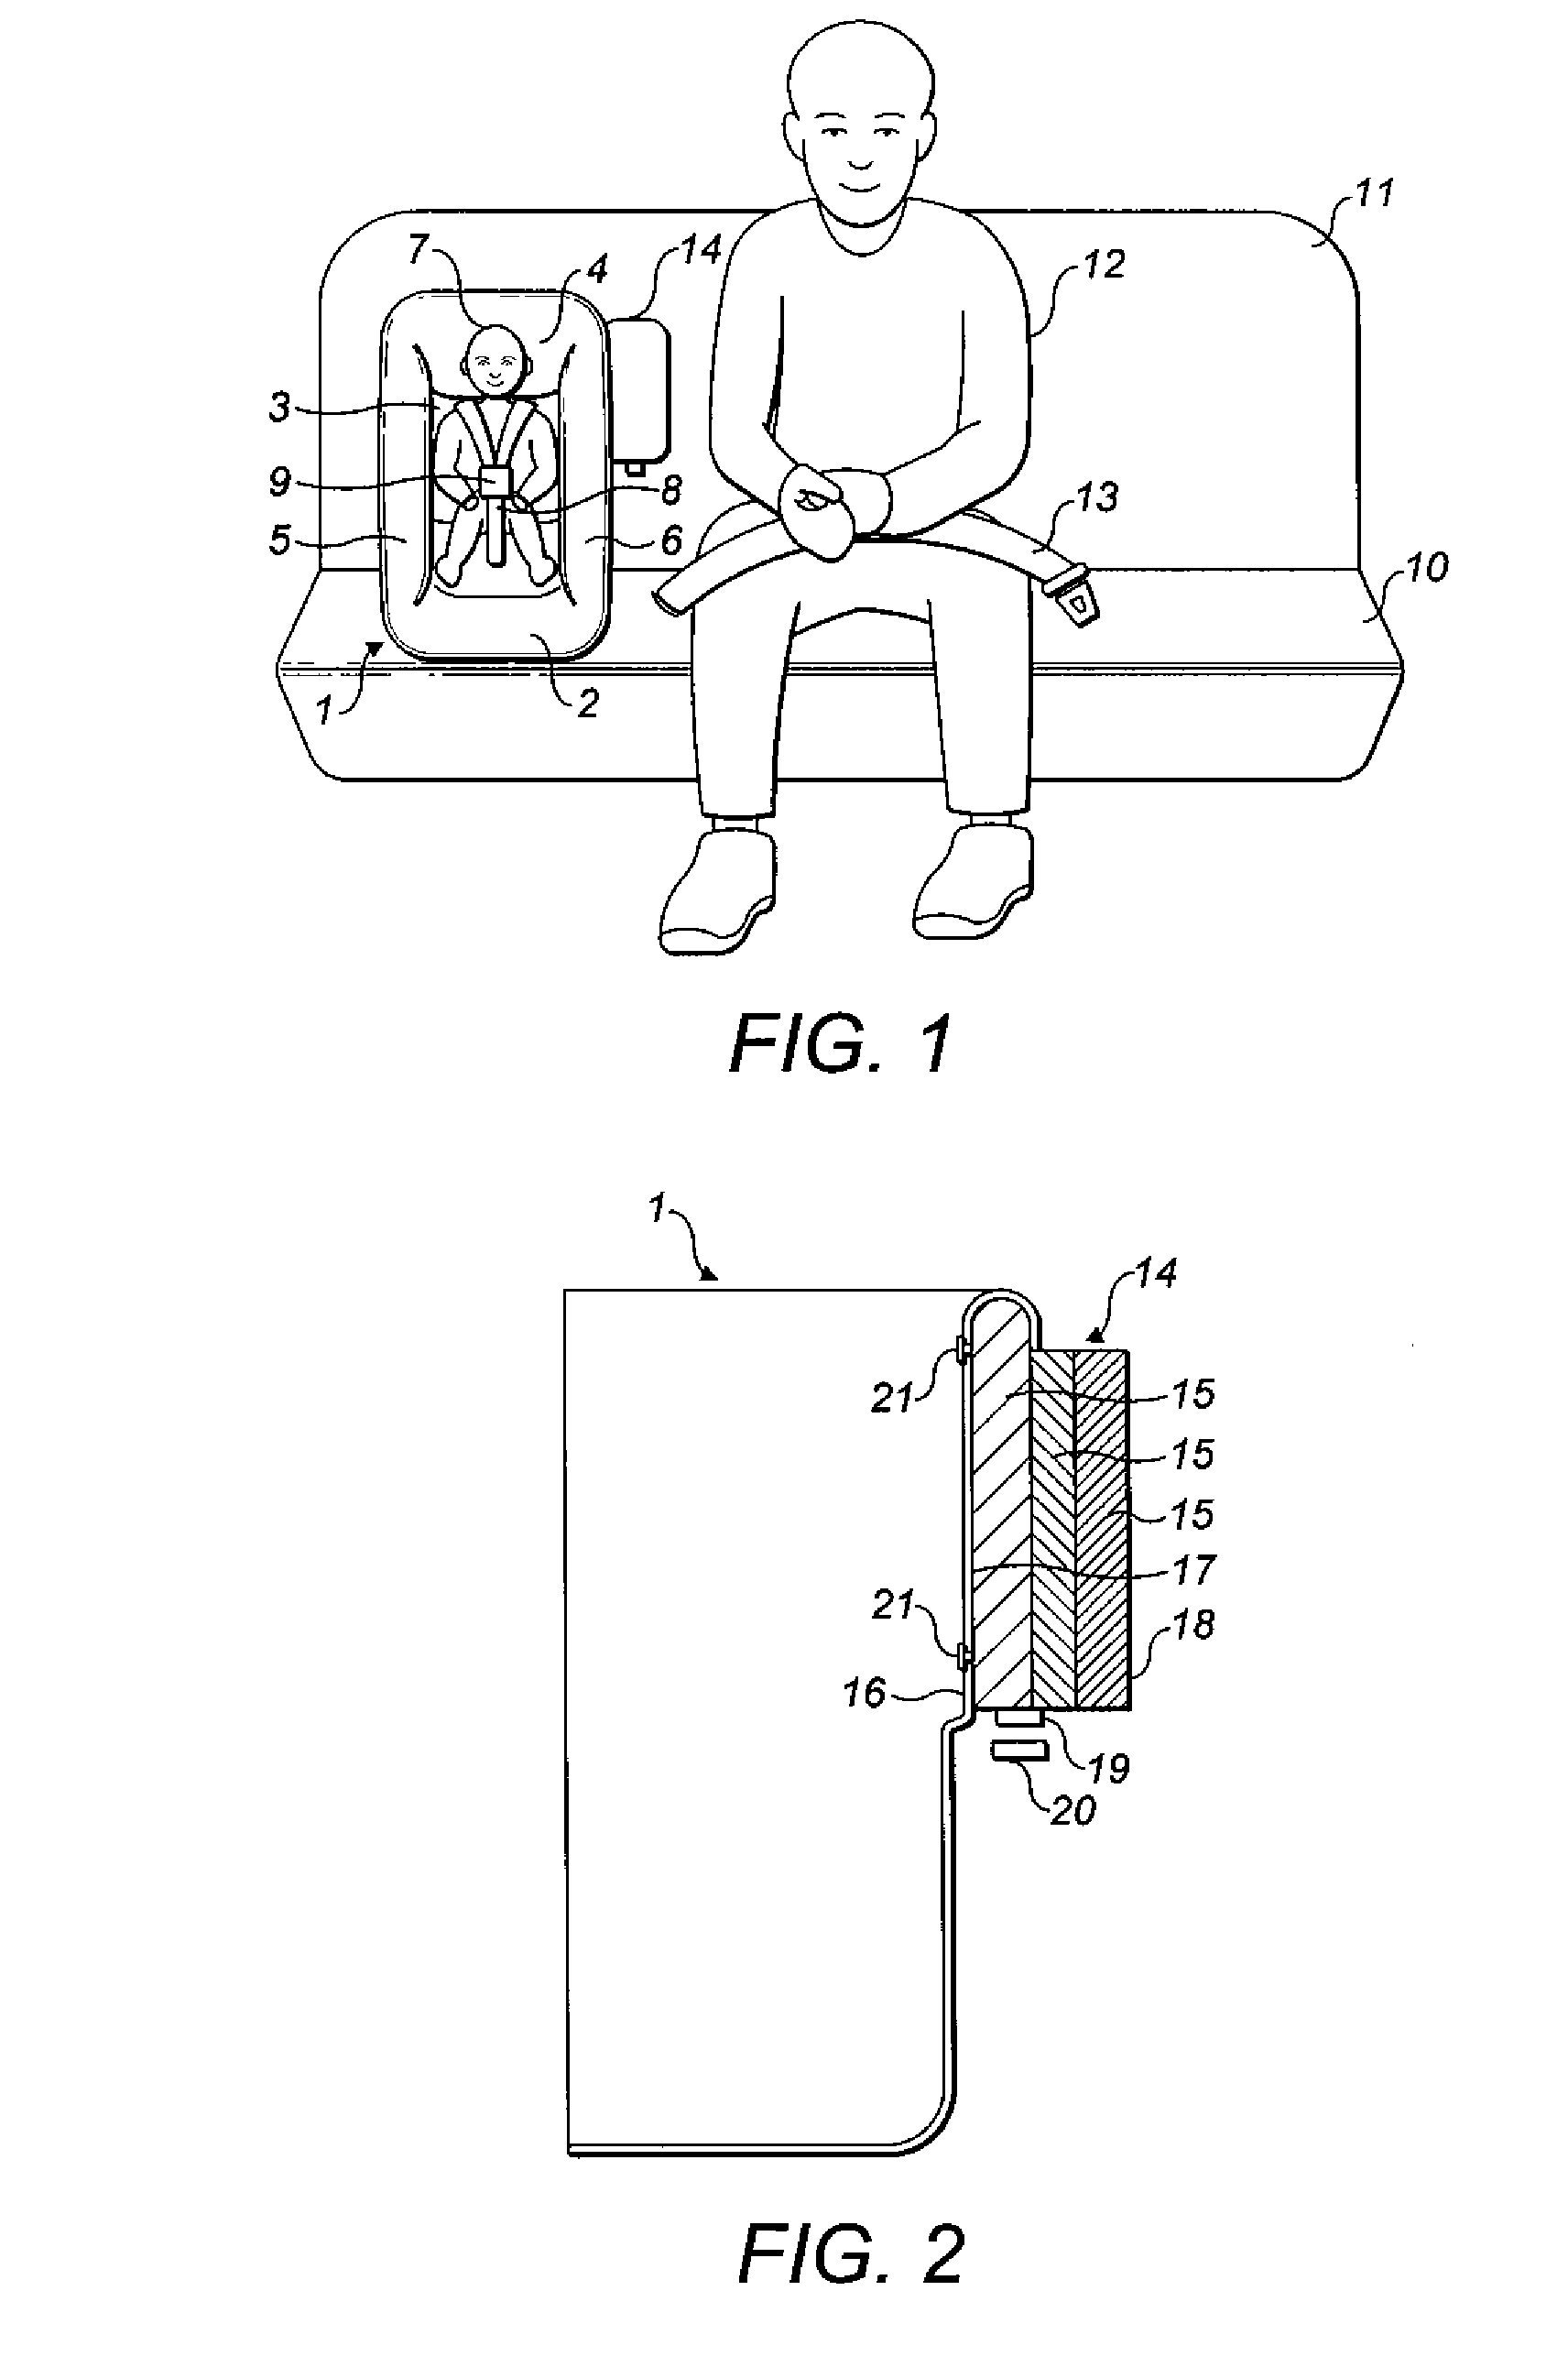 Child restraint apparatus for vehicle